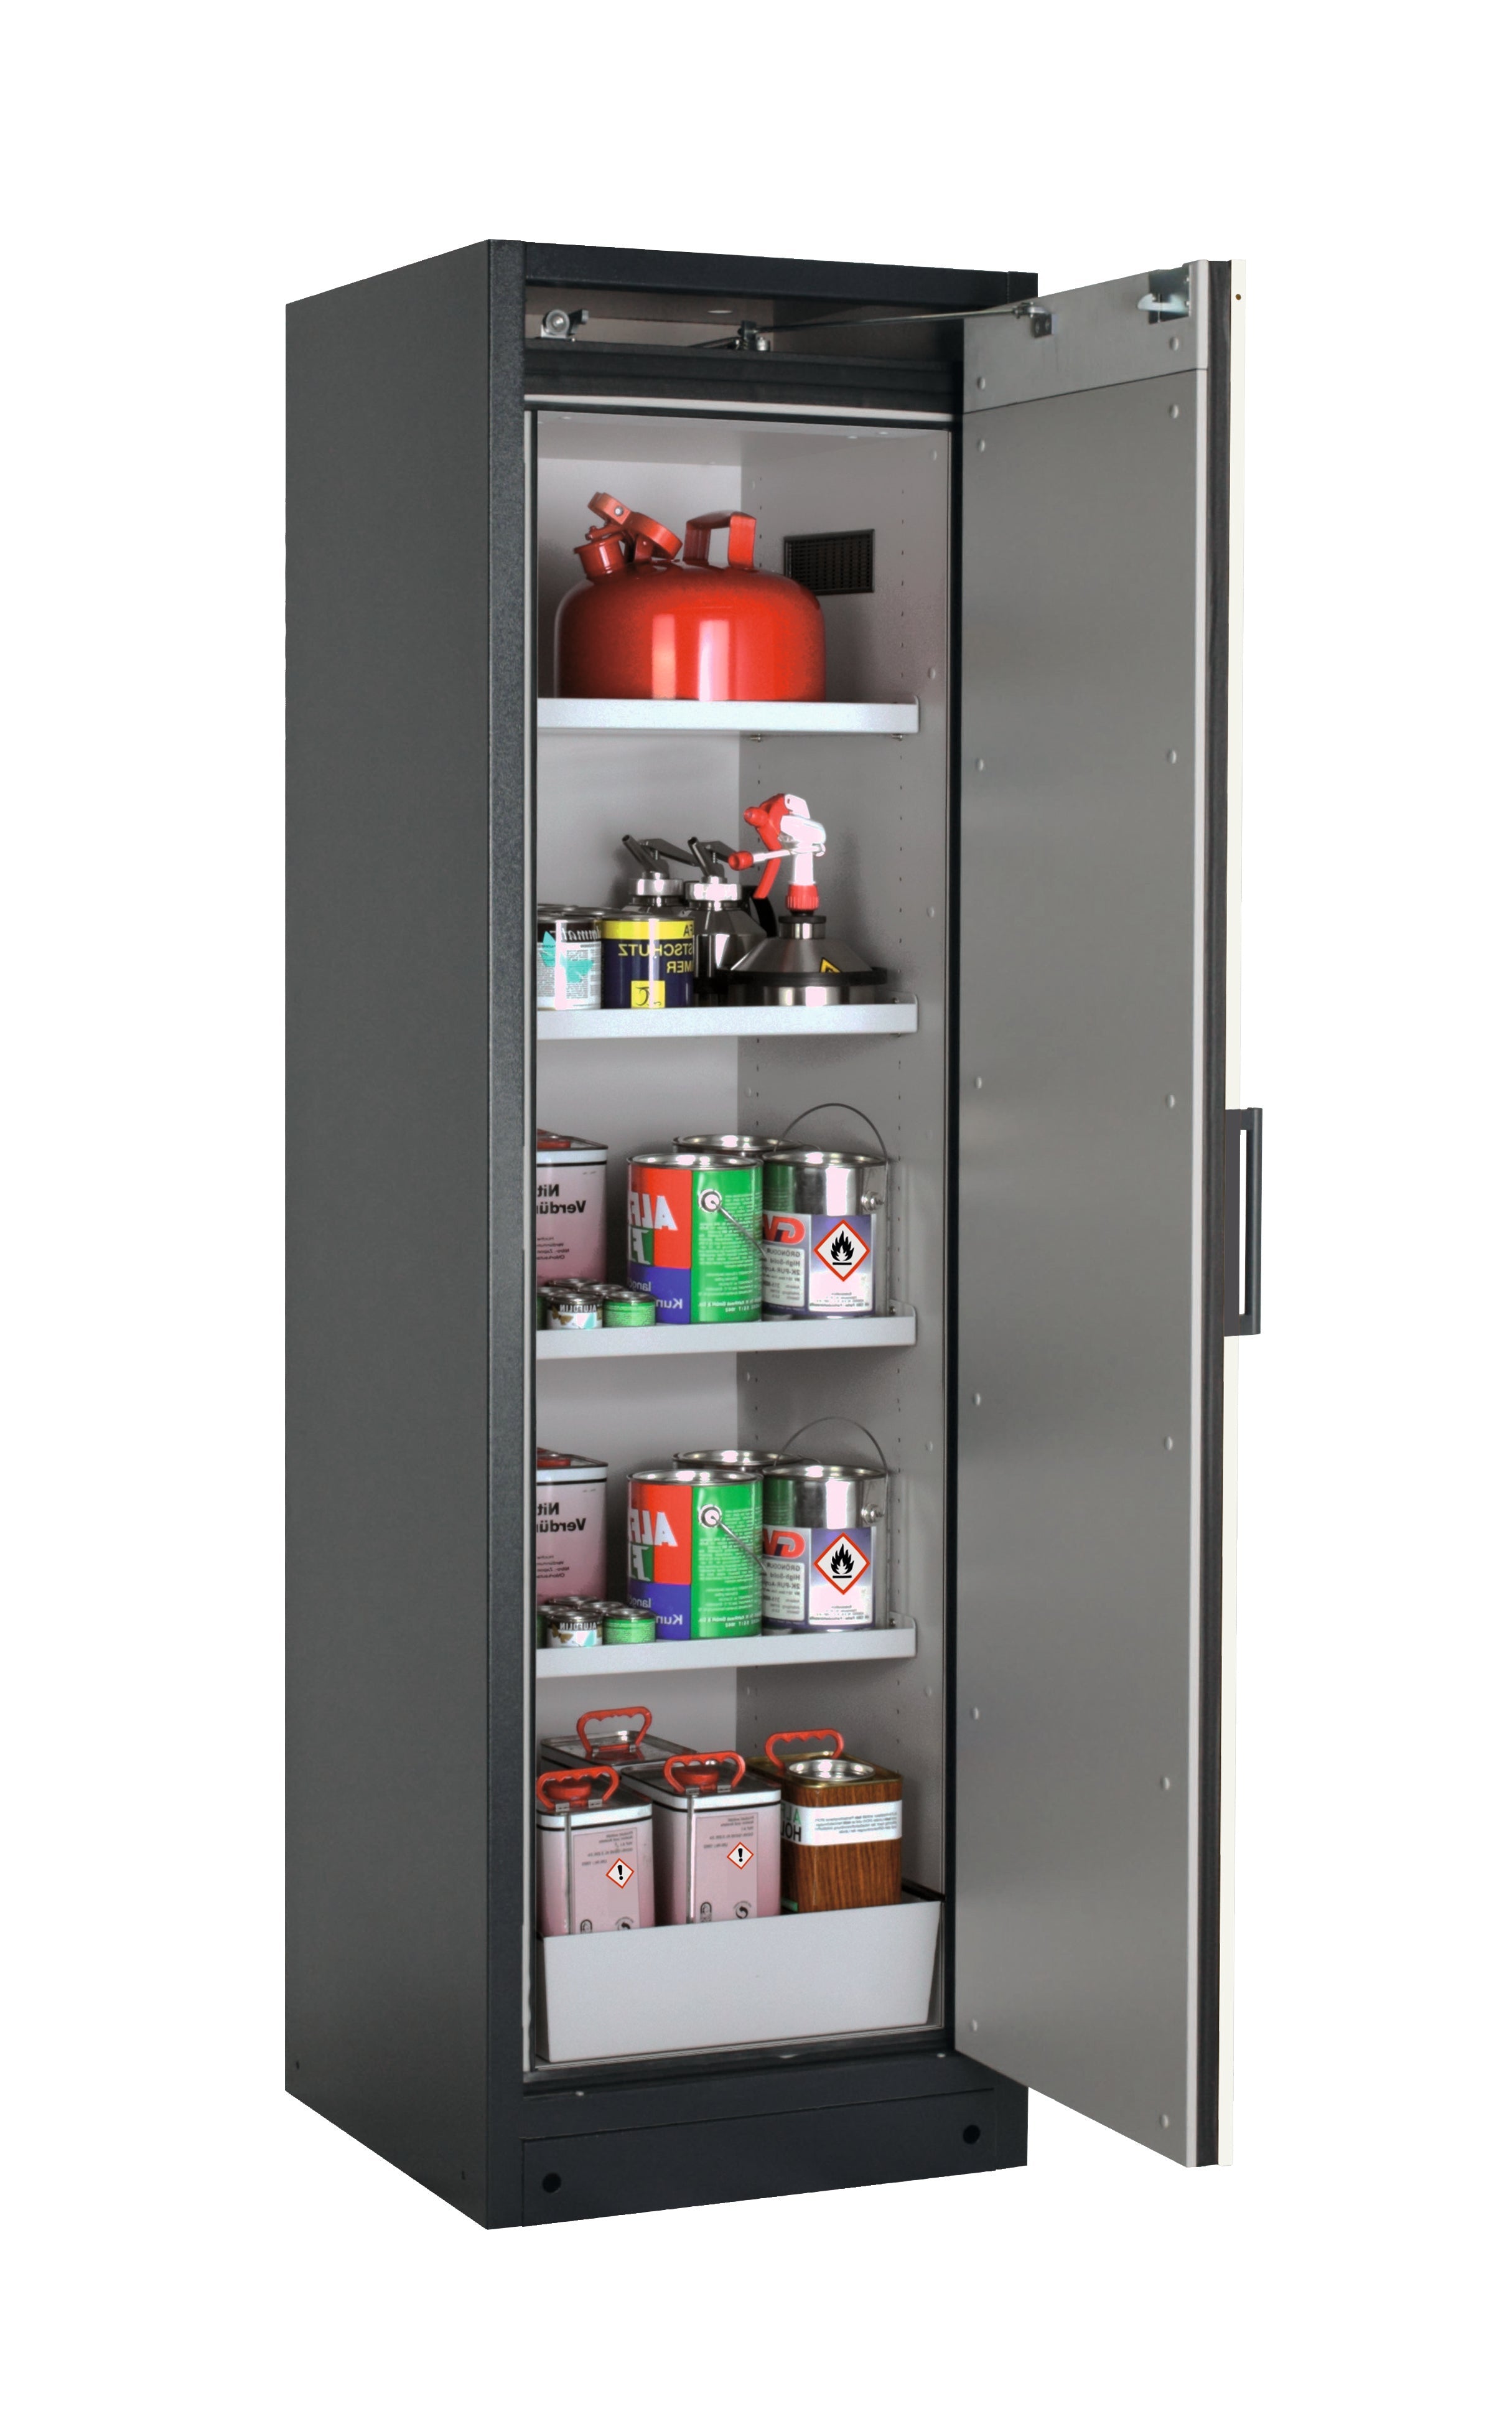 Type 90 safety storage cabinet Q-CLASSIC-90 model Q90.195.060.R in asecos silver with 4x shelf standard (sheet steel),